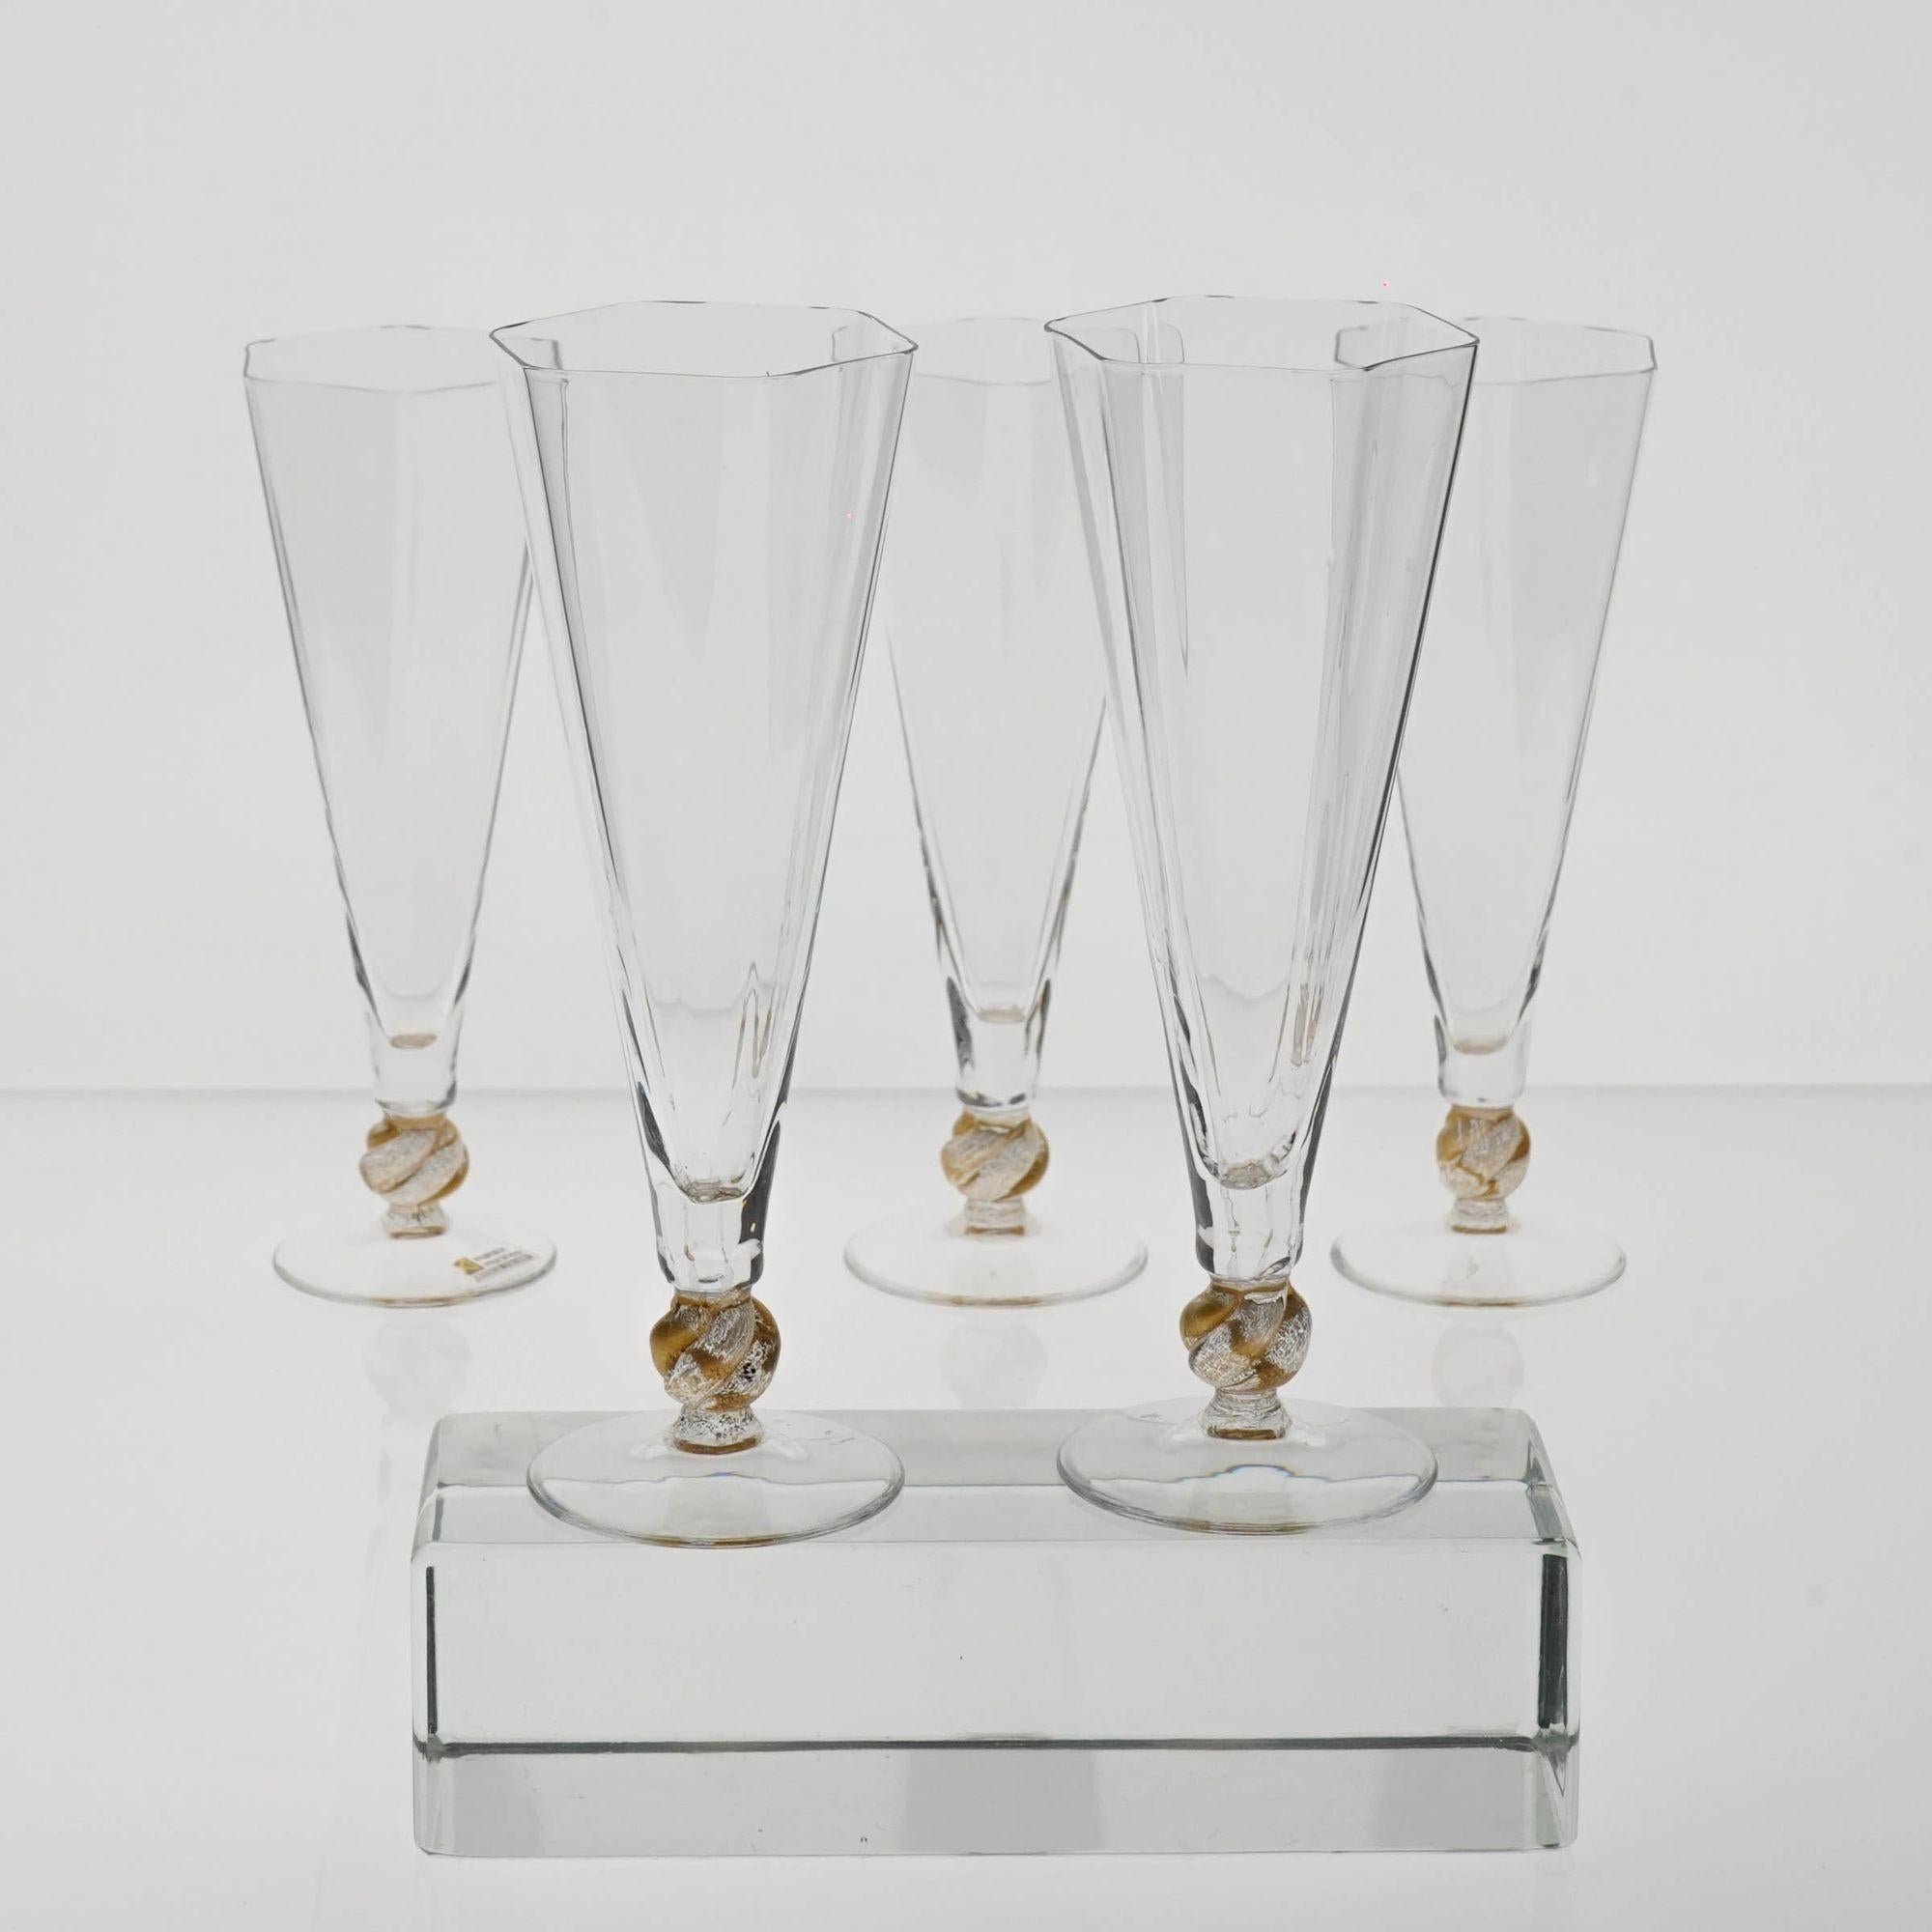 Set of 5 Cenedese Hexagonal Flutes, Gold Accent, Signed, Unique For Sale 10